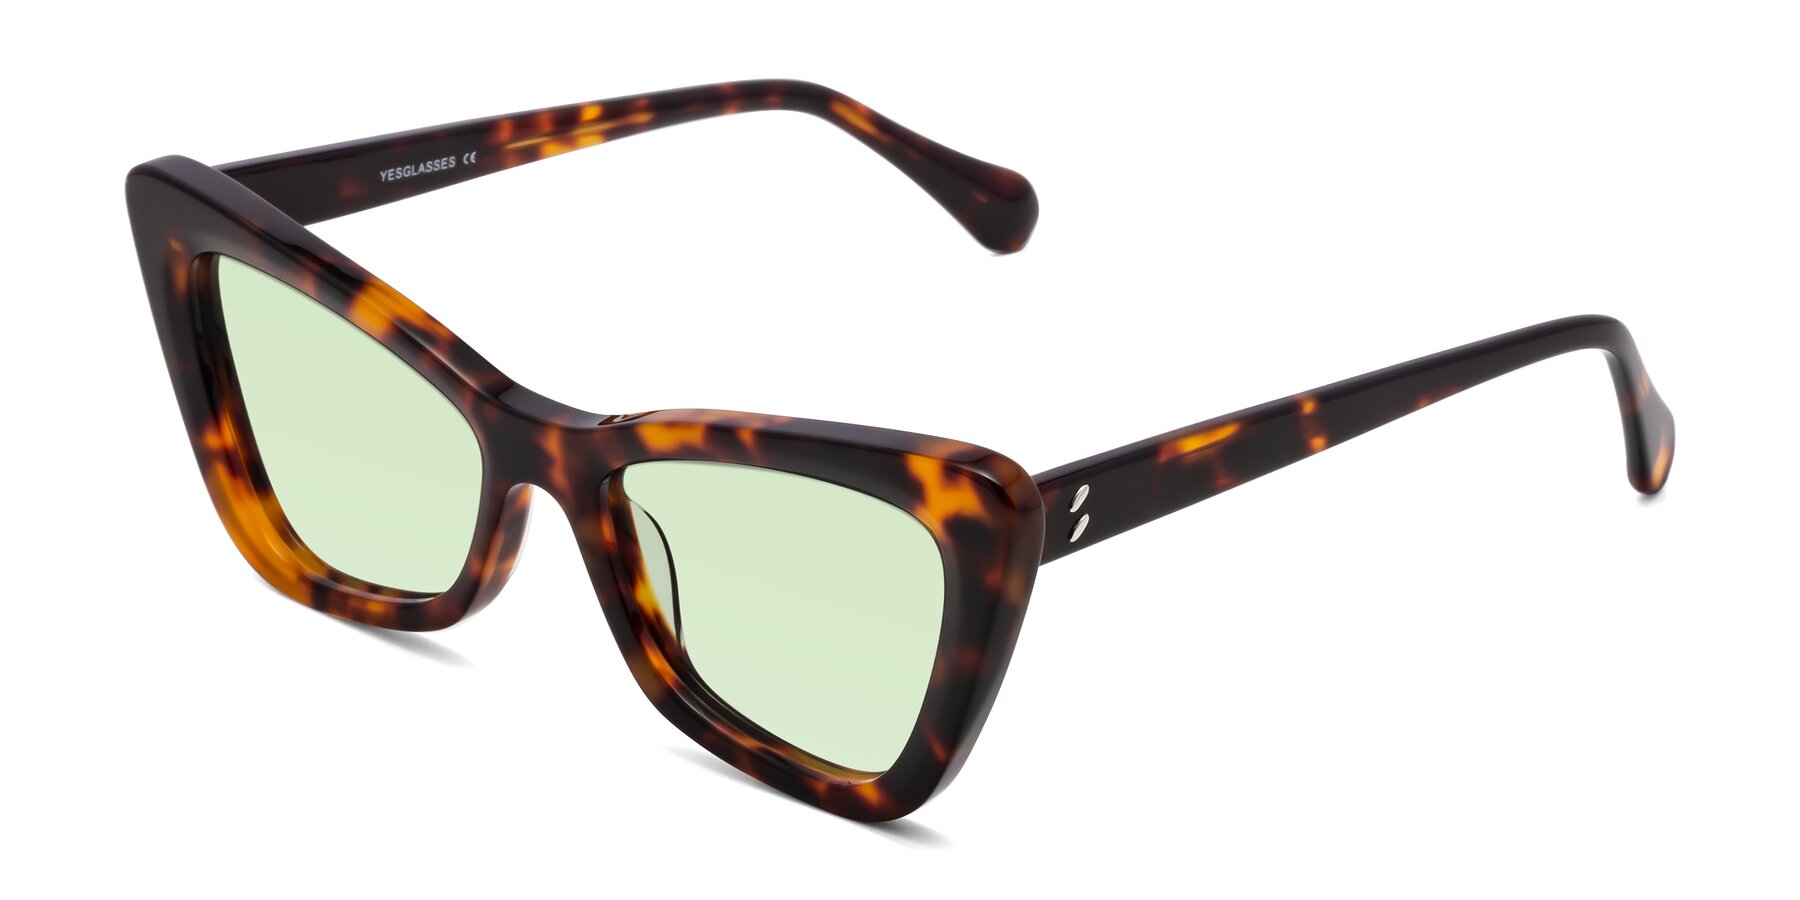 Angle of Rua in Tortoise with Light Green Tinted Lenses